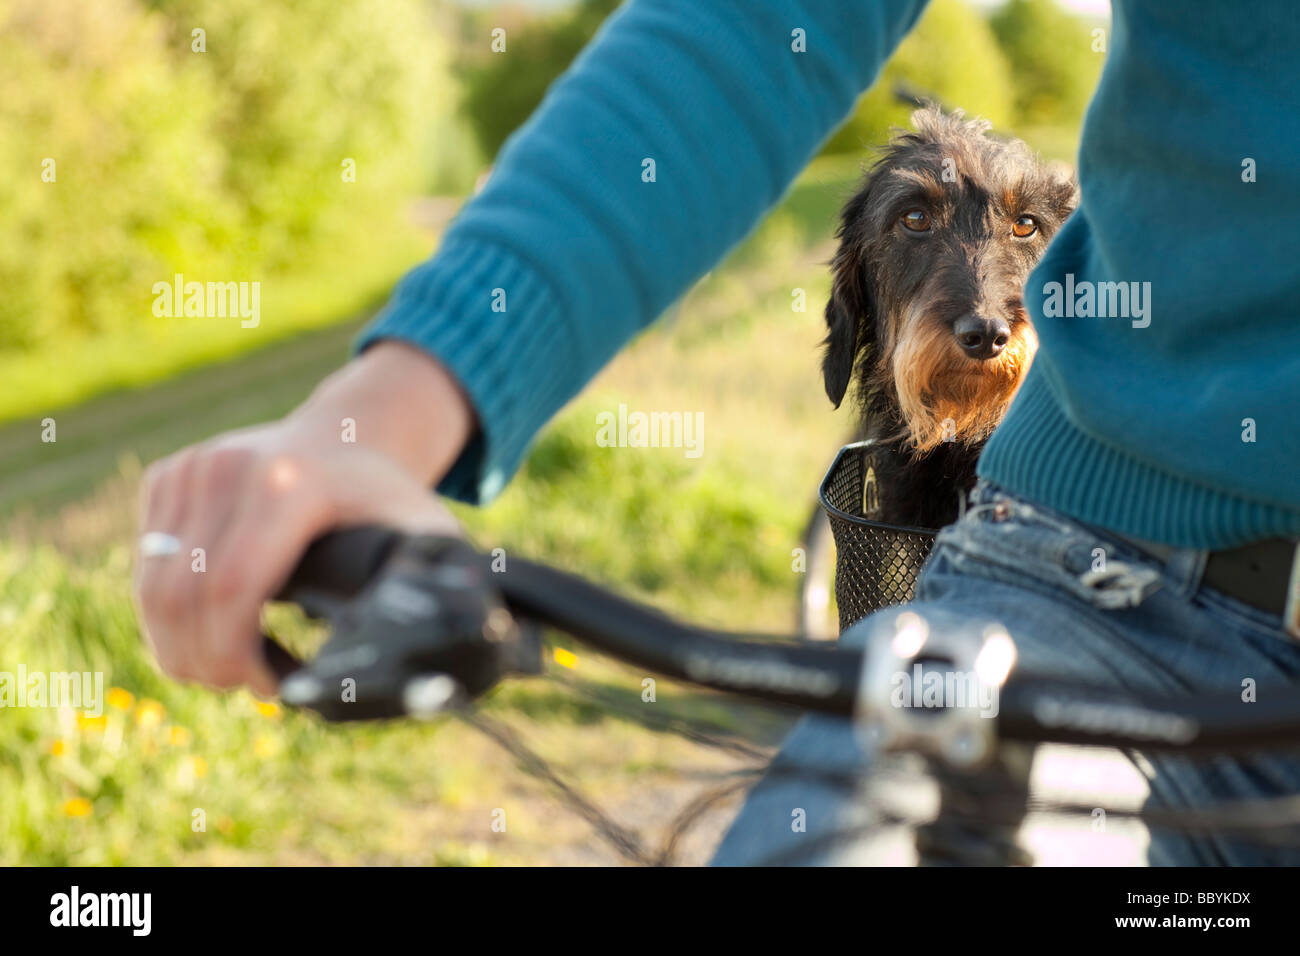 Young man and dog on a bike Stock Photo